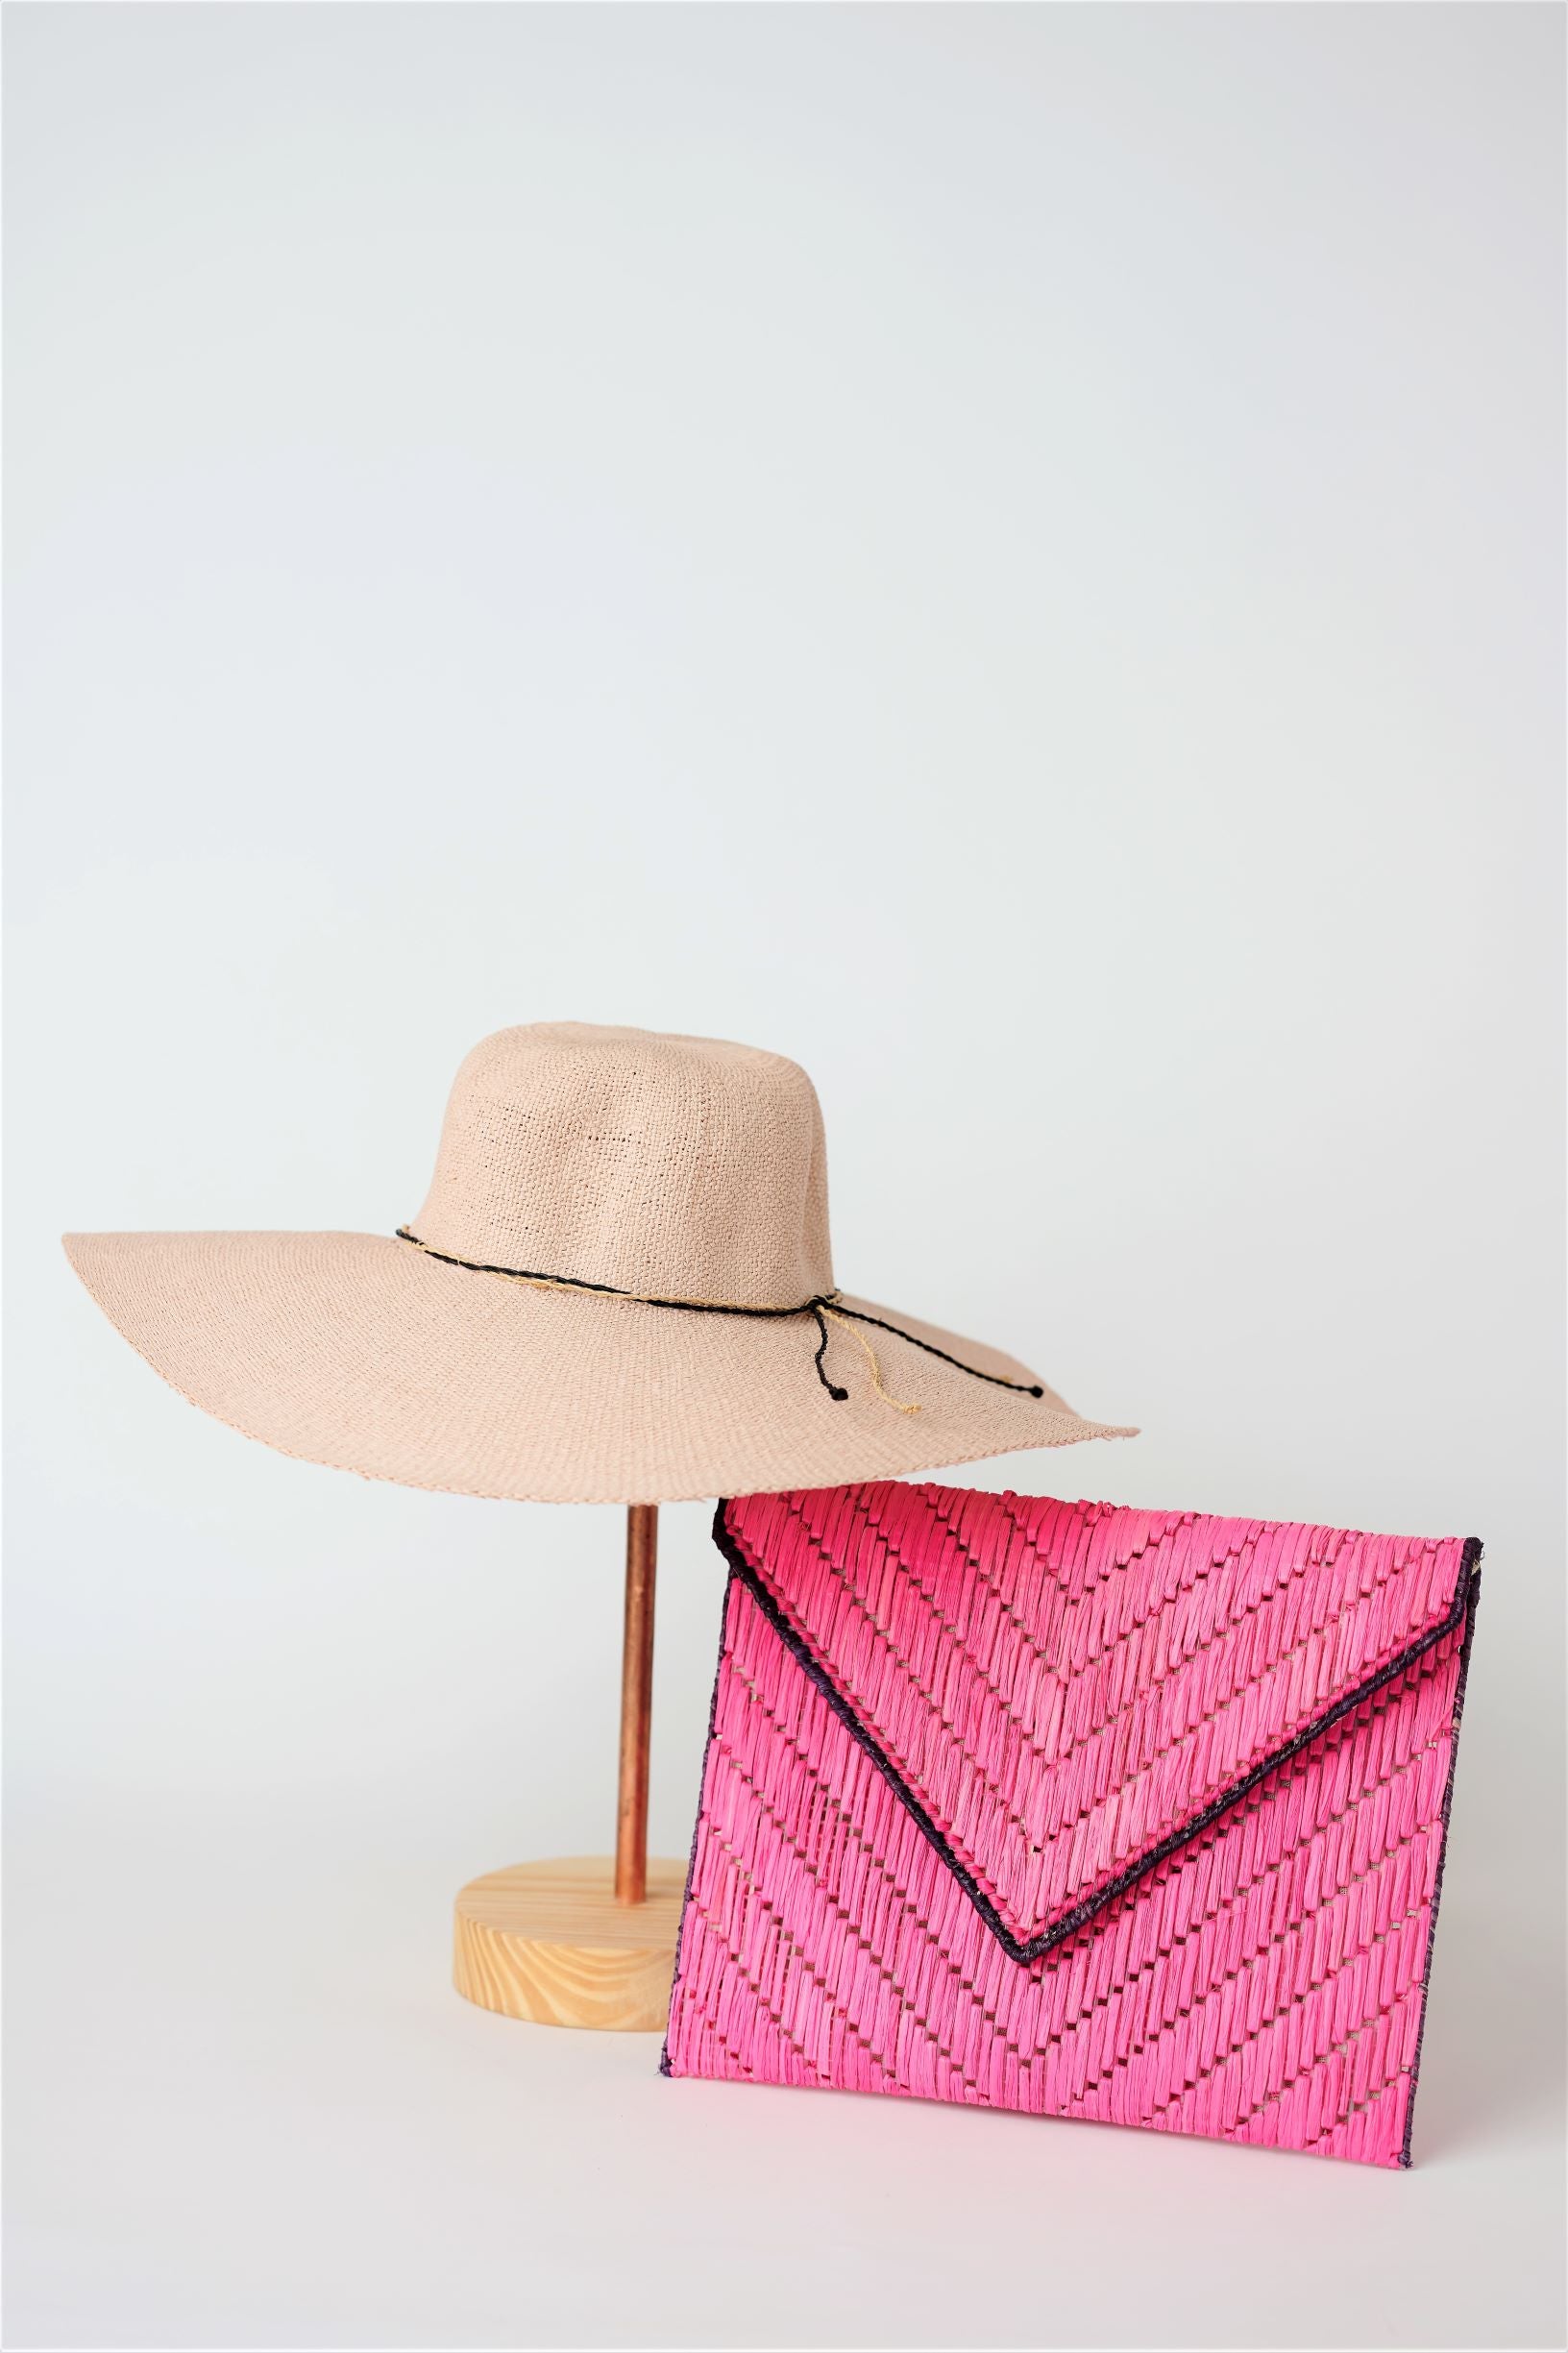 Collection of pink straw from Anya & Niki - the Big Hat and the Pixley Clutch